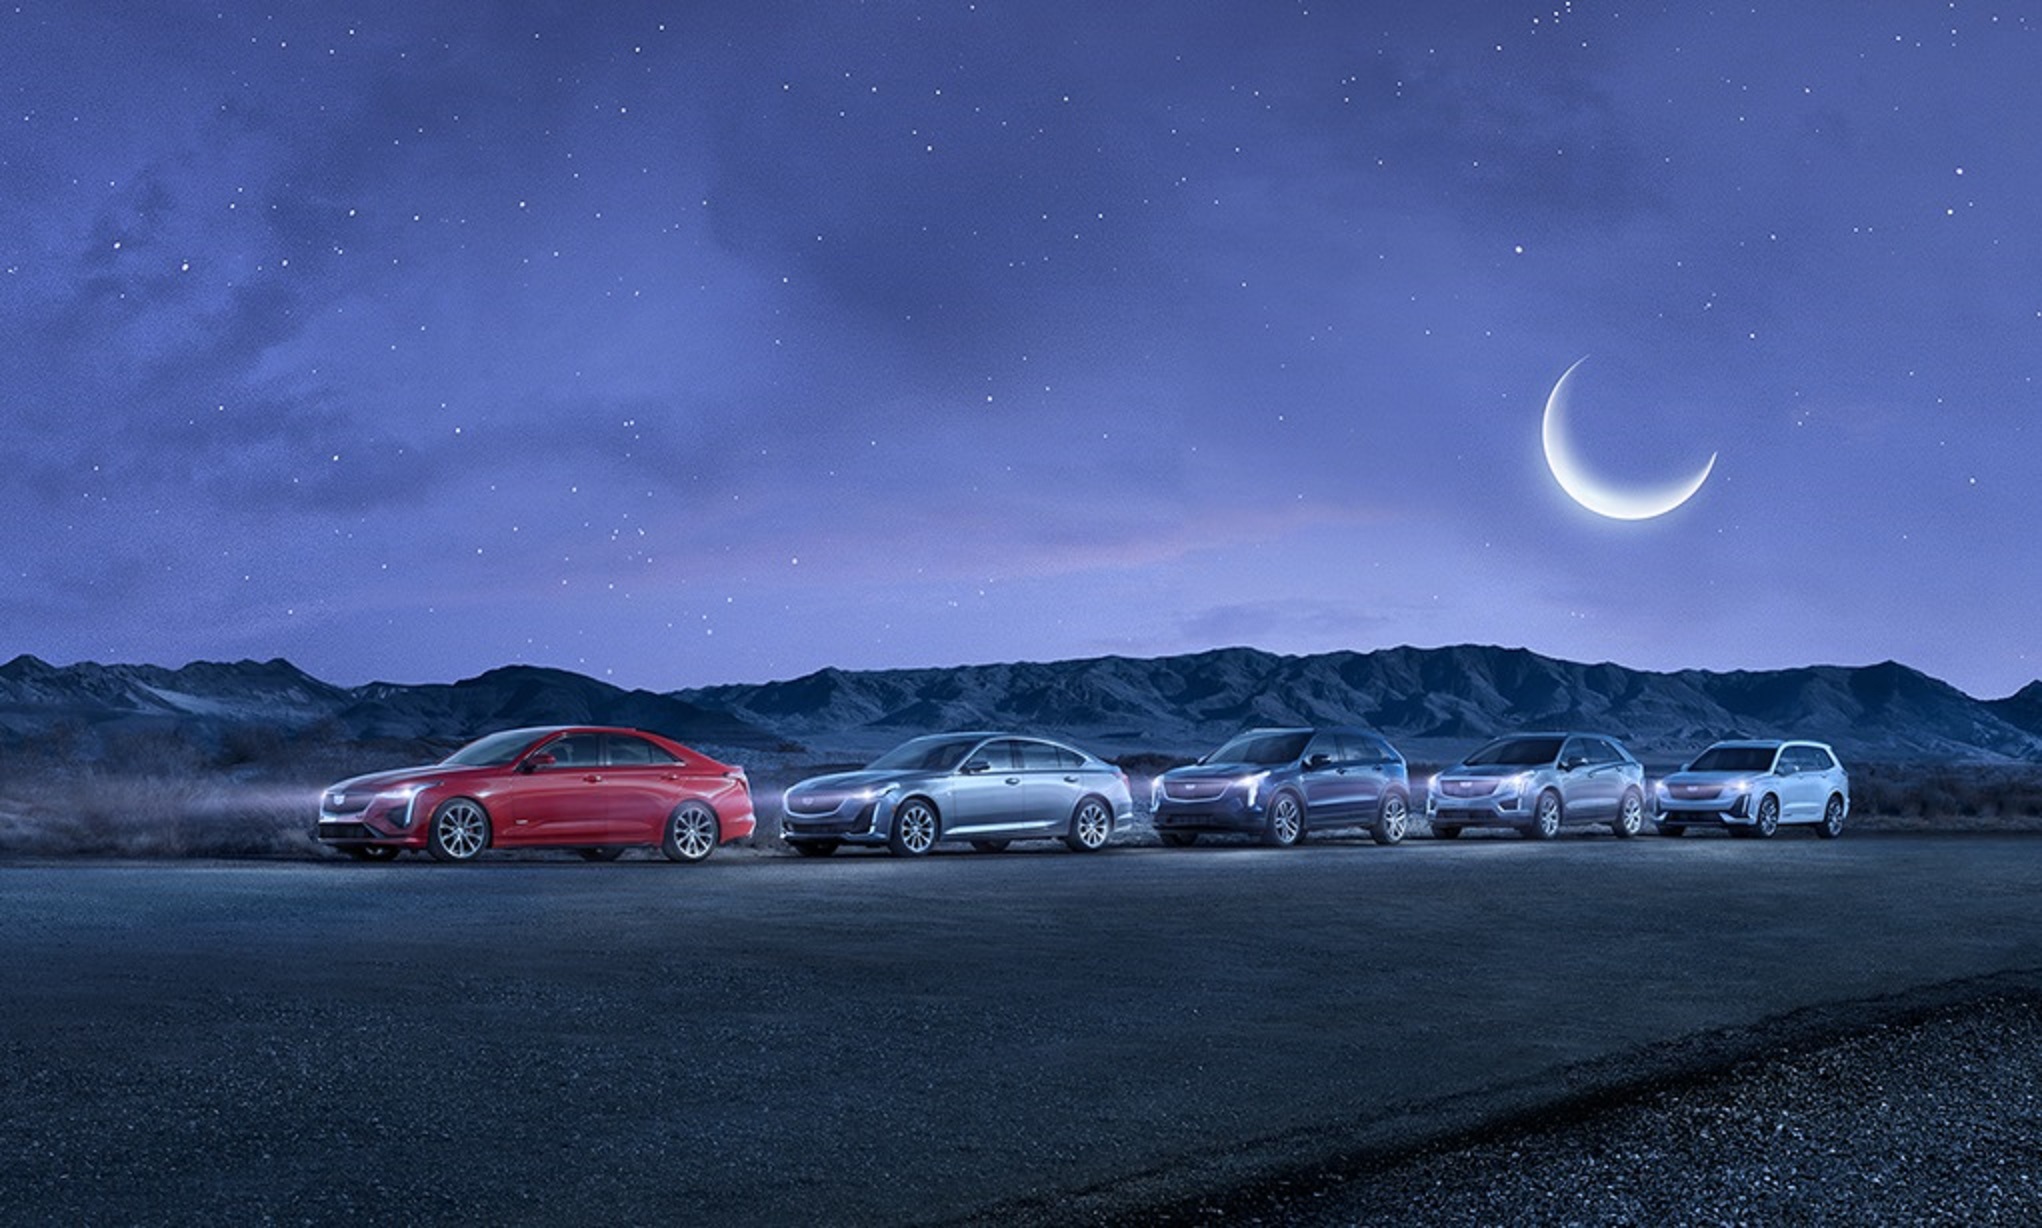 Cadillac Celebrates the Holy Month of Ramadan with Exclusive offers across its Luxurious line-up in the UAE